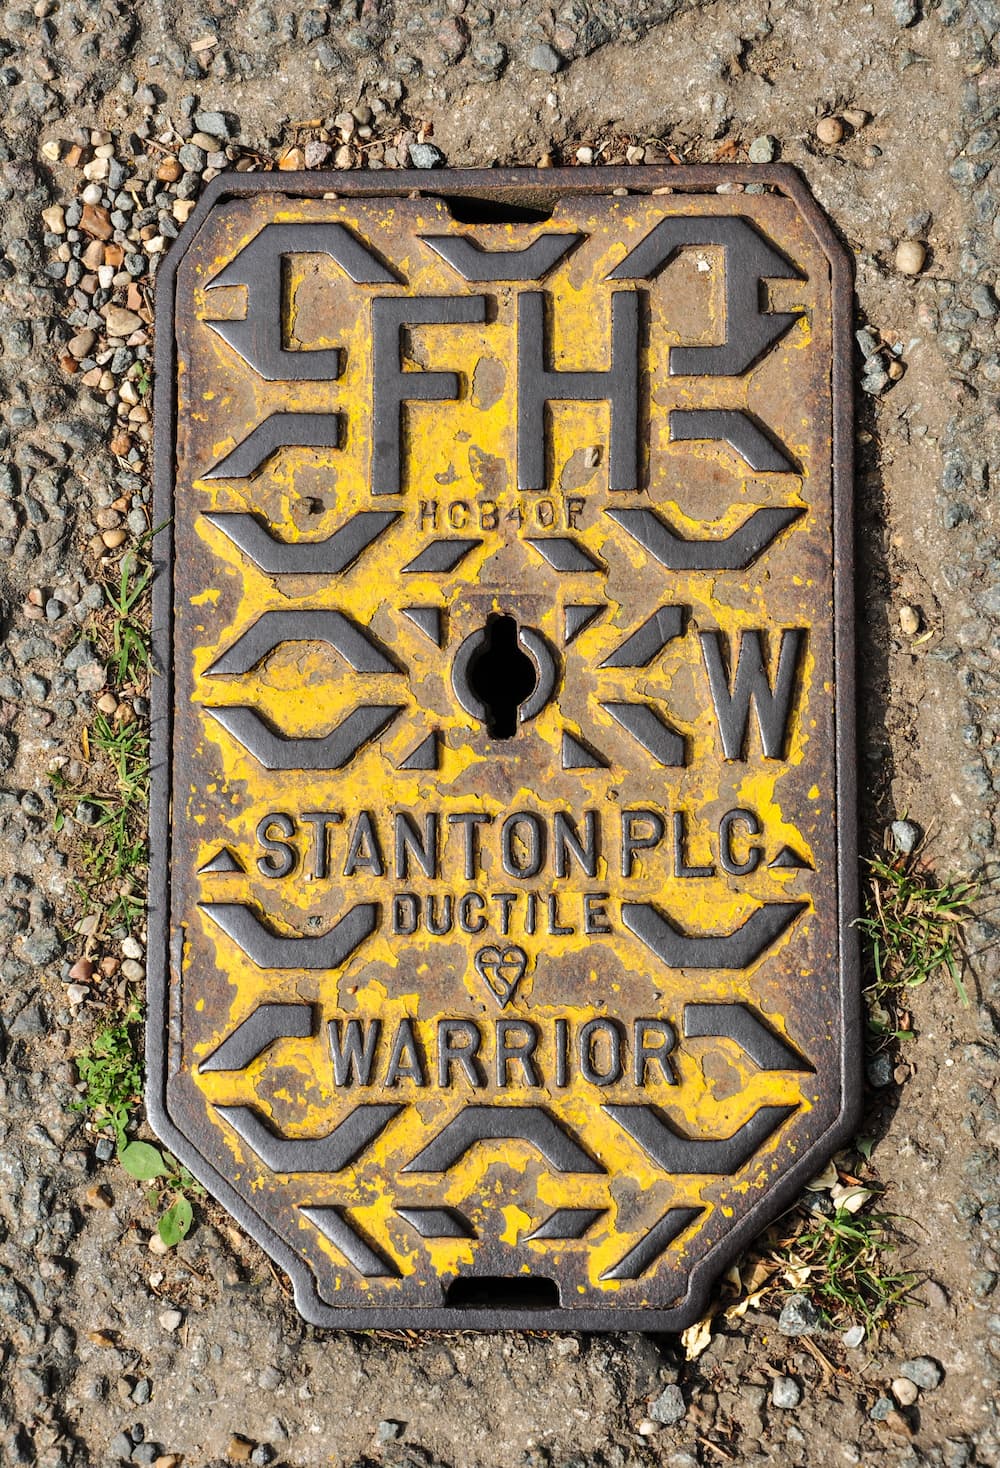 A metal fire hydrant cover with 'FH' on it.